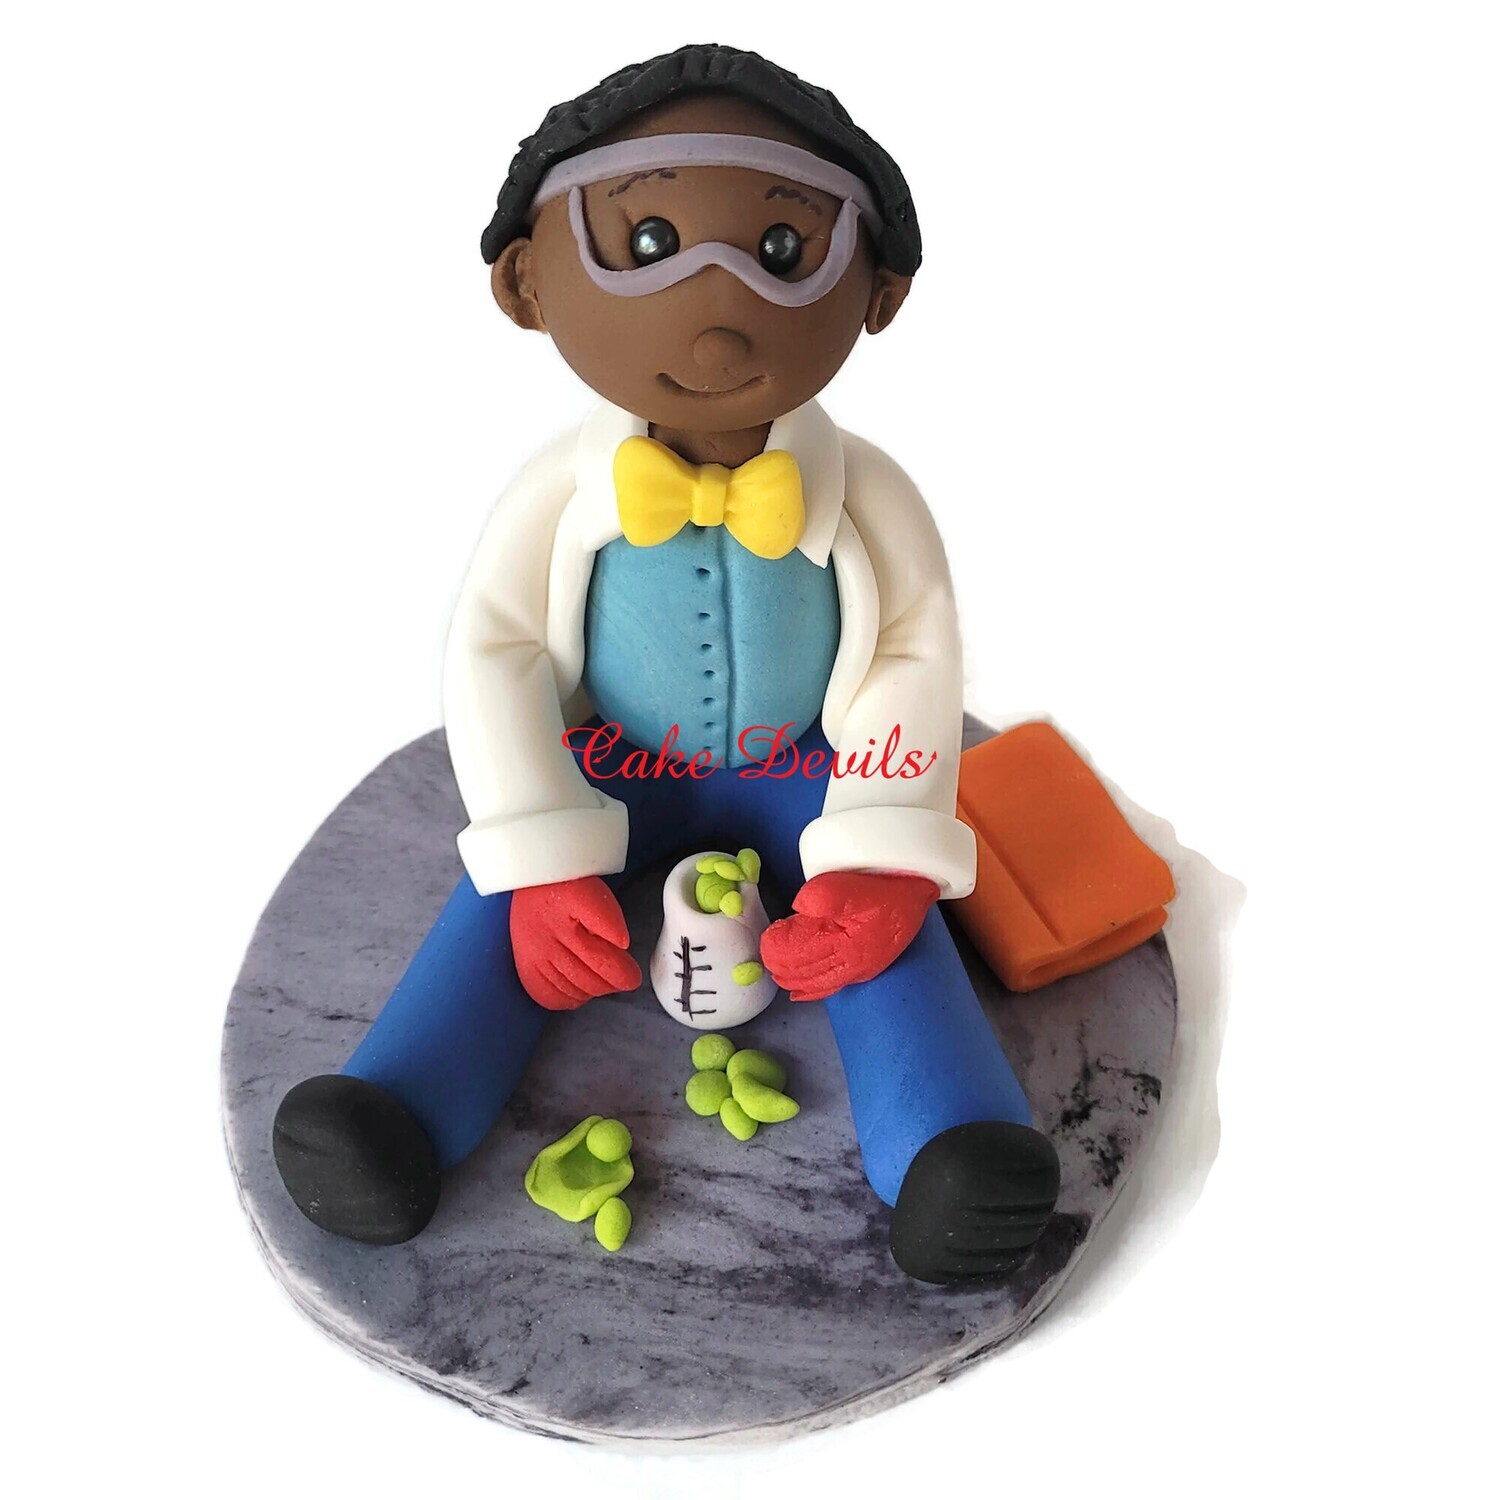 Scientist Cake Topper, Handmade Fondant Science Person cake Decoration, with goggles, beaker and book